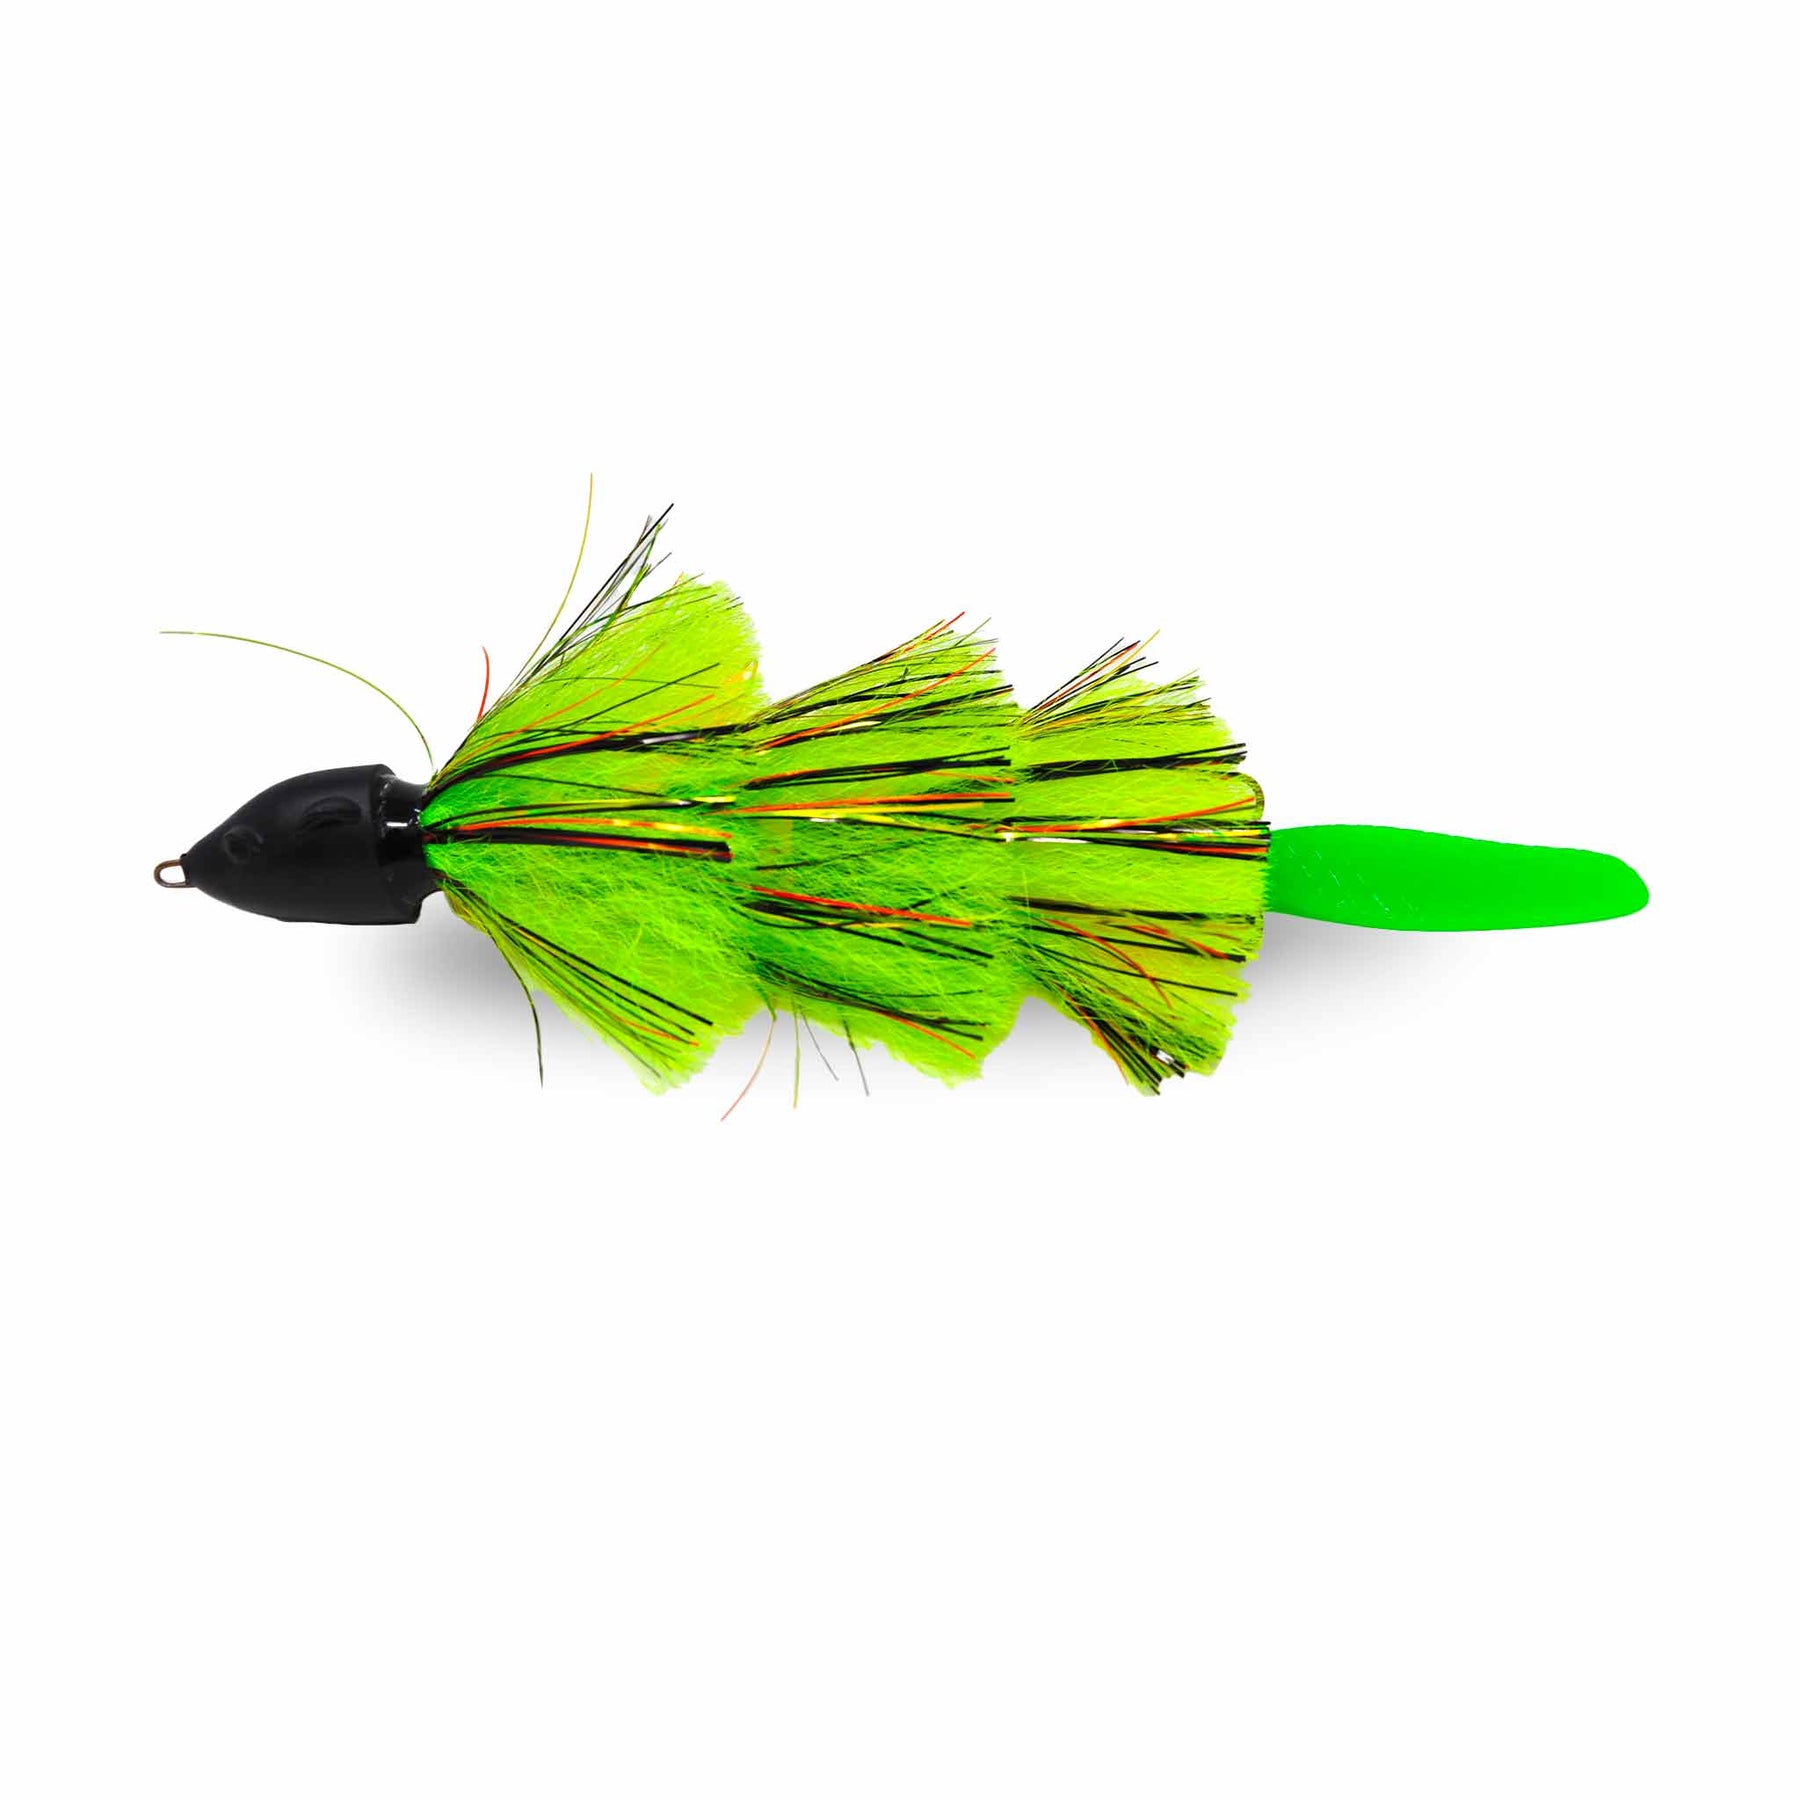 View of Jerk-Glide_Baits Beaver's Baits Baby Beaver XL Jerkbait Nuclear available at EZOKO Pike and Musky Shop